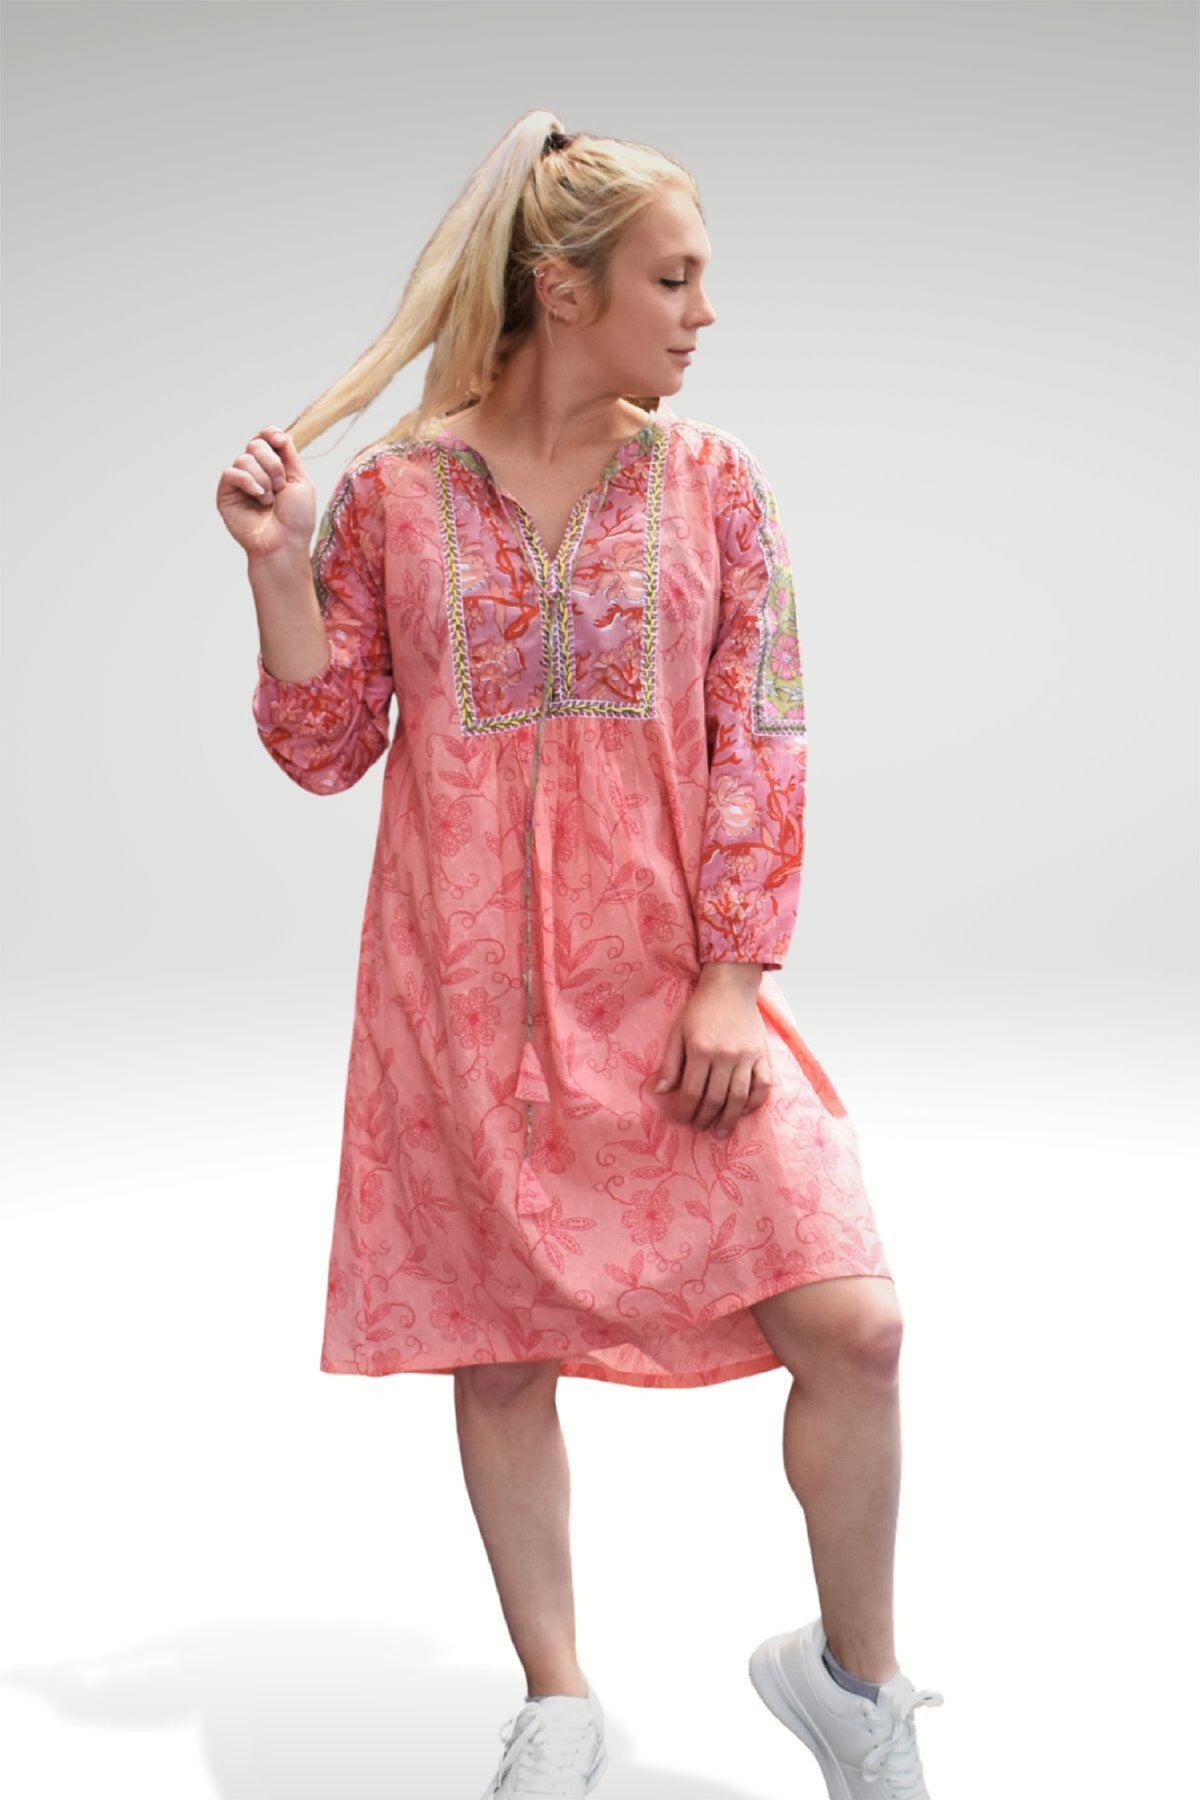 MEADOW FLORAL PATCHWORK DRESS IN PEACH FLORAL COLORWAY- FRONT VIEW - zohaonline